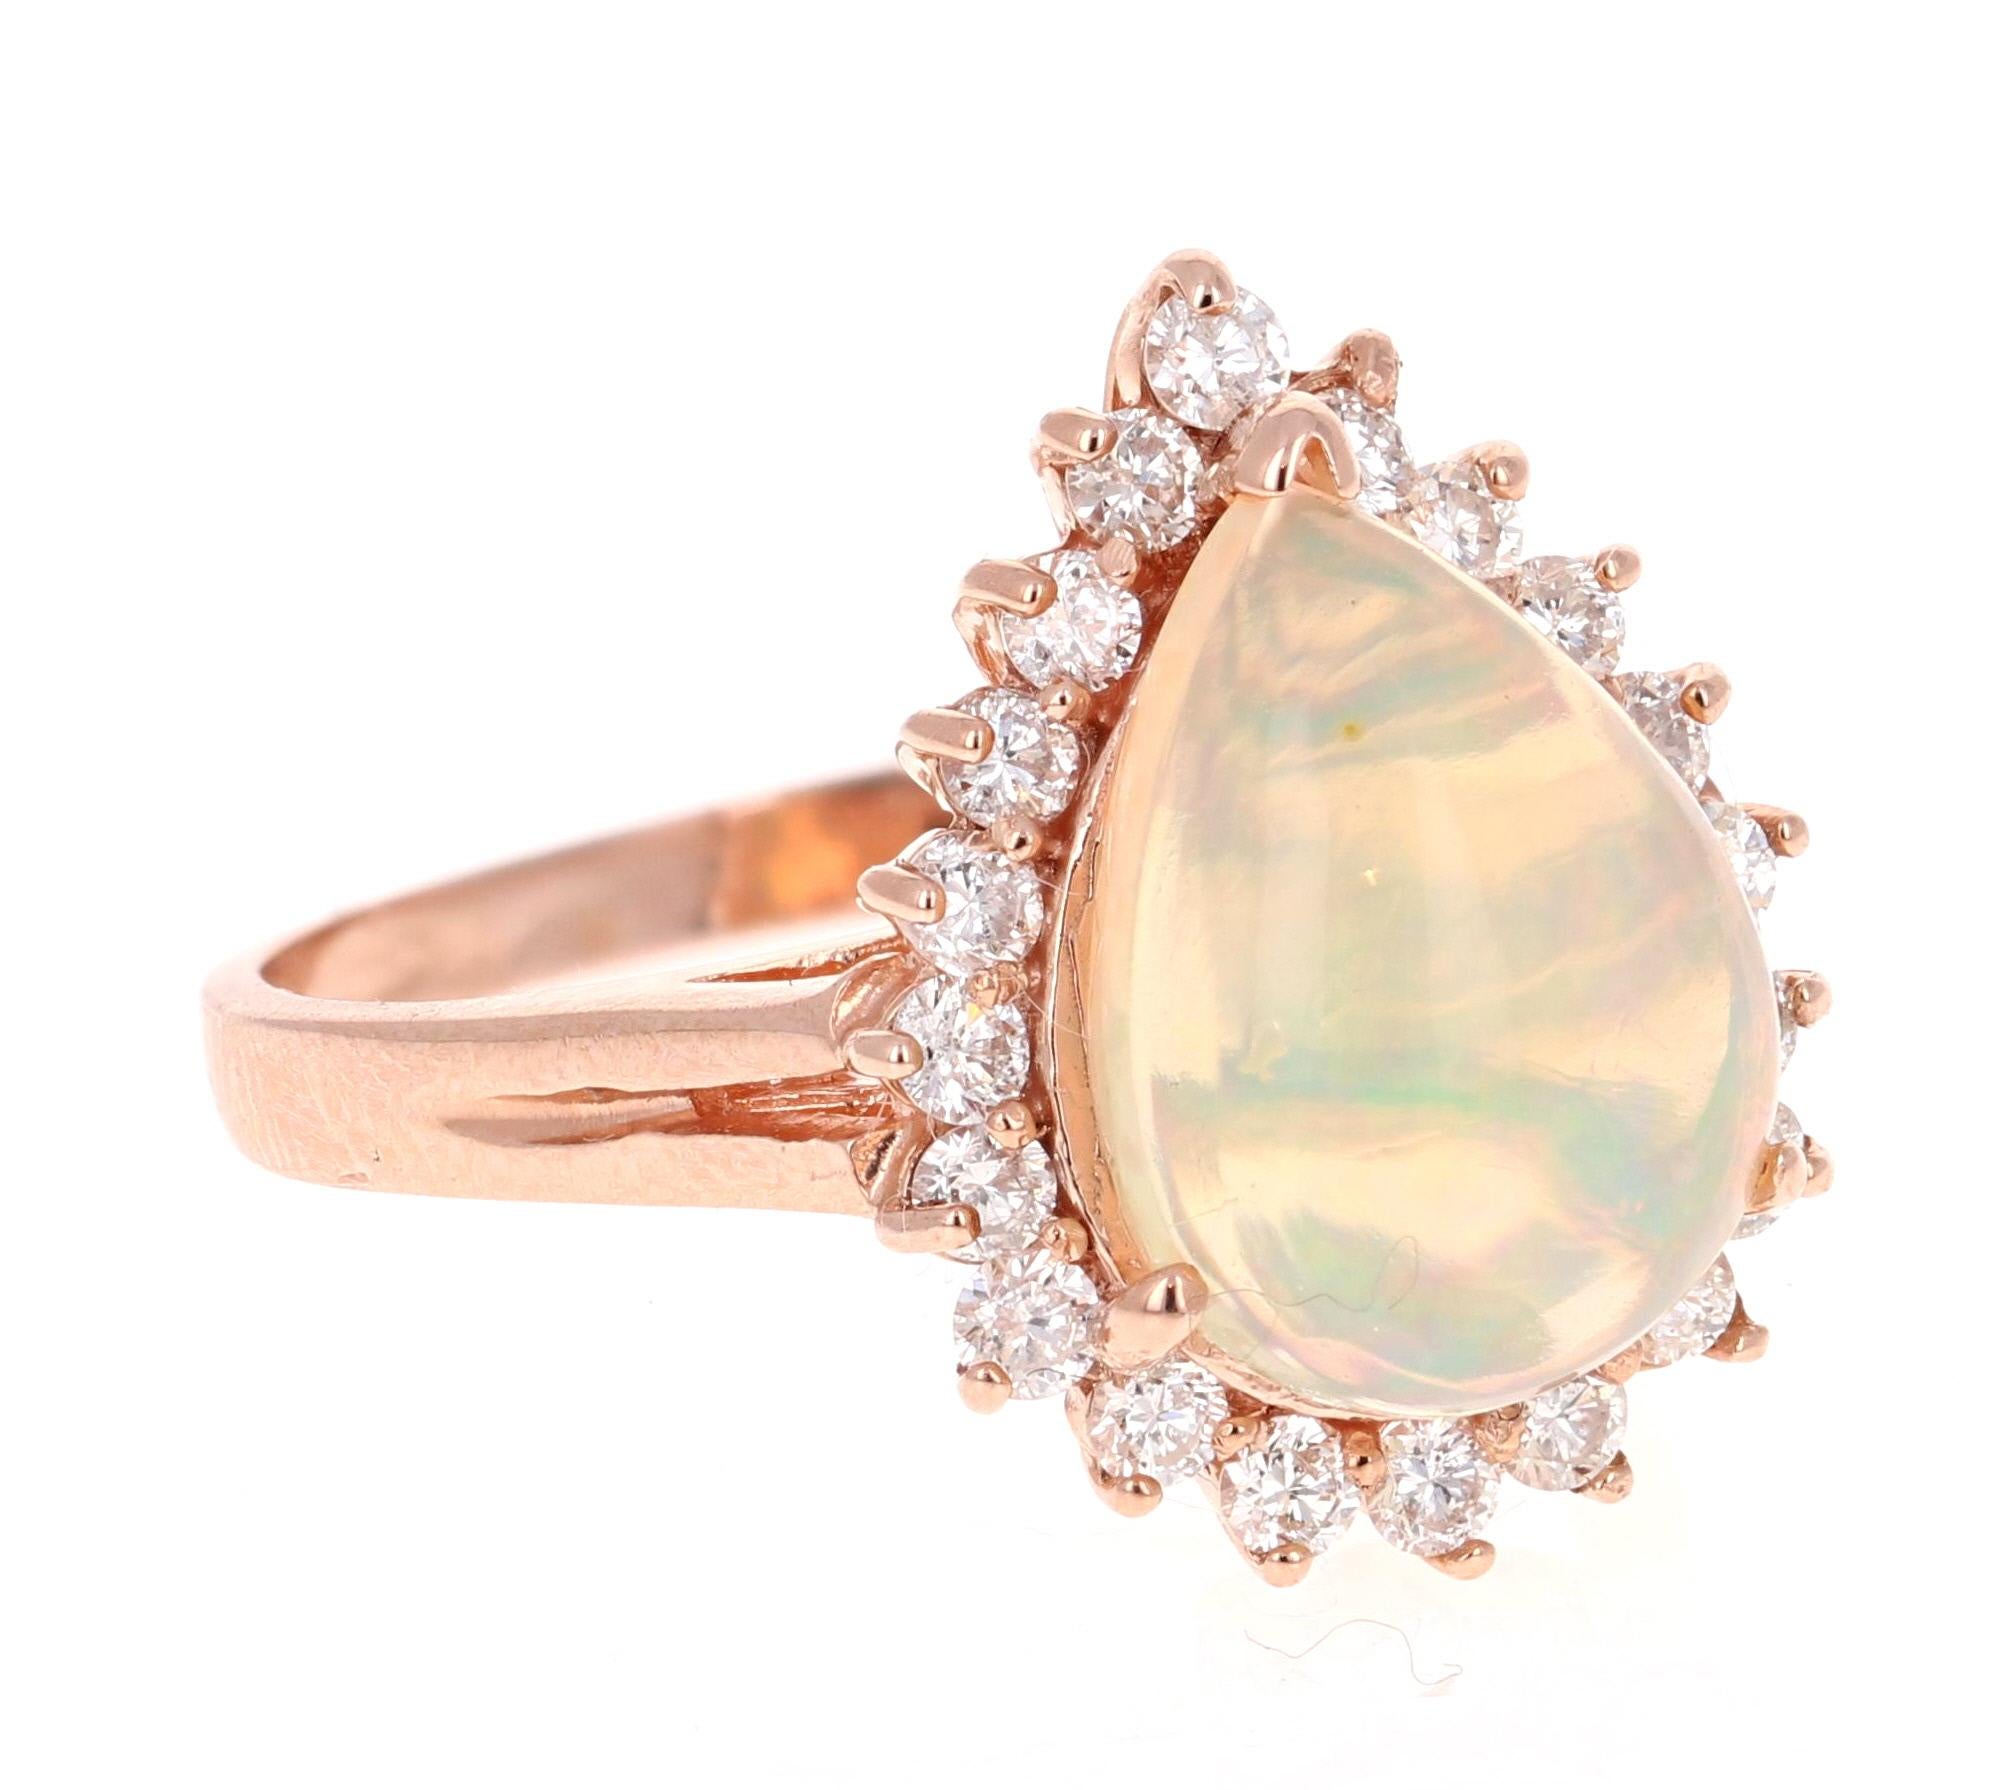 Opulent 3.18 Carat Opal and Diamond Ring in 14K Rose Gold.
The beautiful Pear Cut Opal with its striking flashes of color weighs 2.59 carats. It is surrounded by 20 Round Cut Diamonds that weigh 0.59 carats.  The total carat weight of the ring is